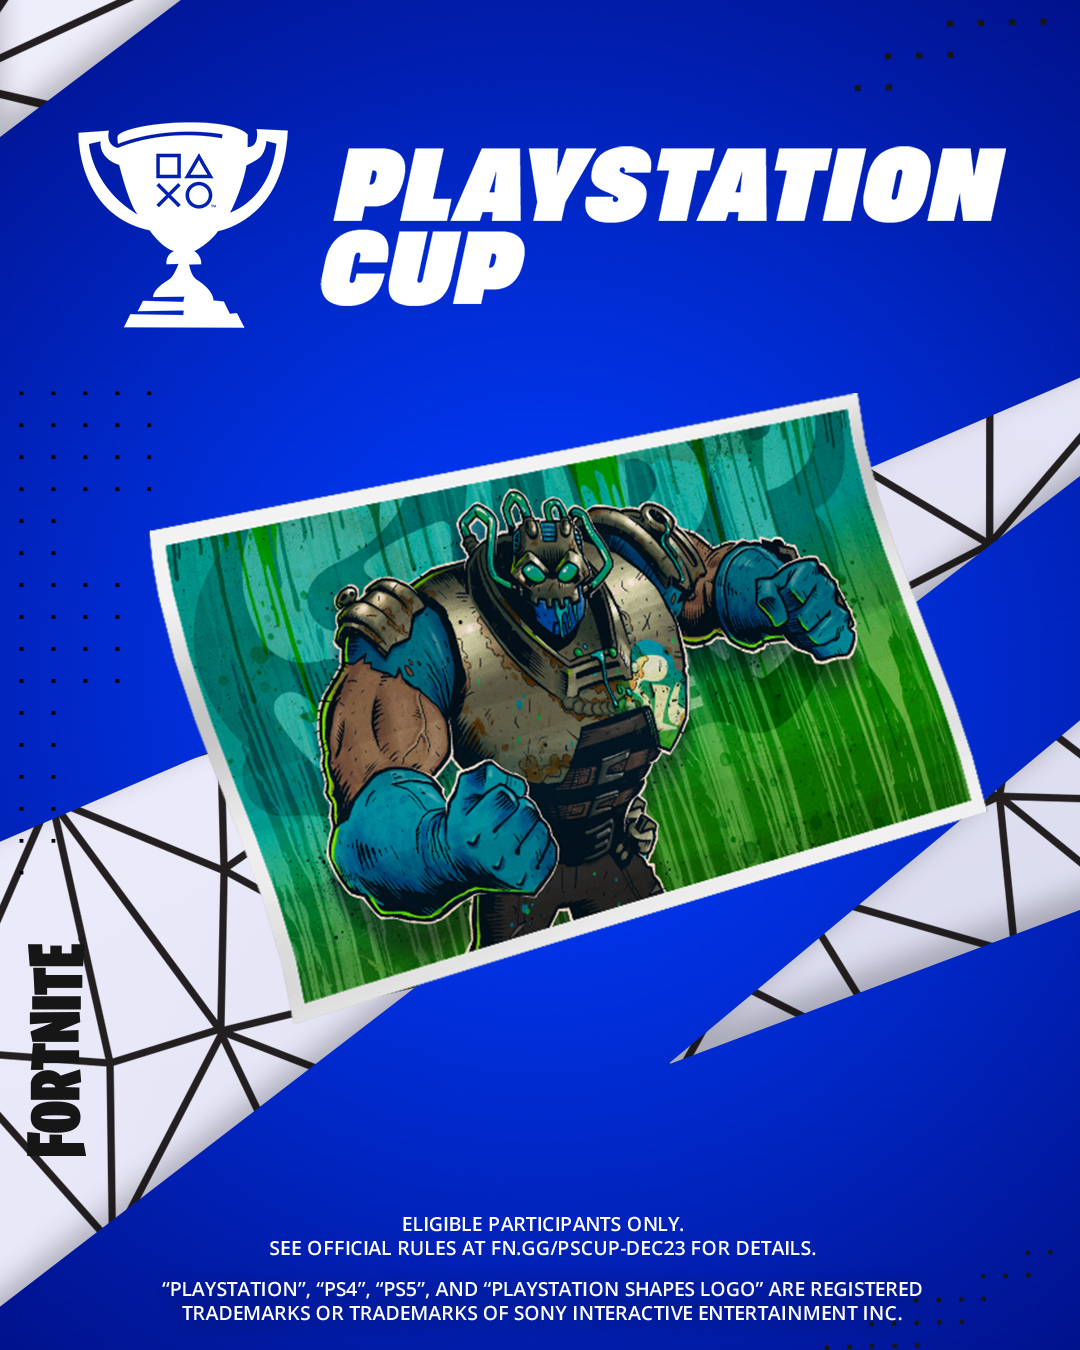 Fortnite RANKED CUP SQUADS Tournament! ($100,000,000) 